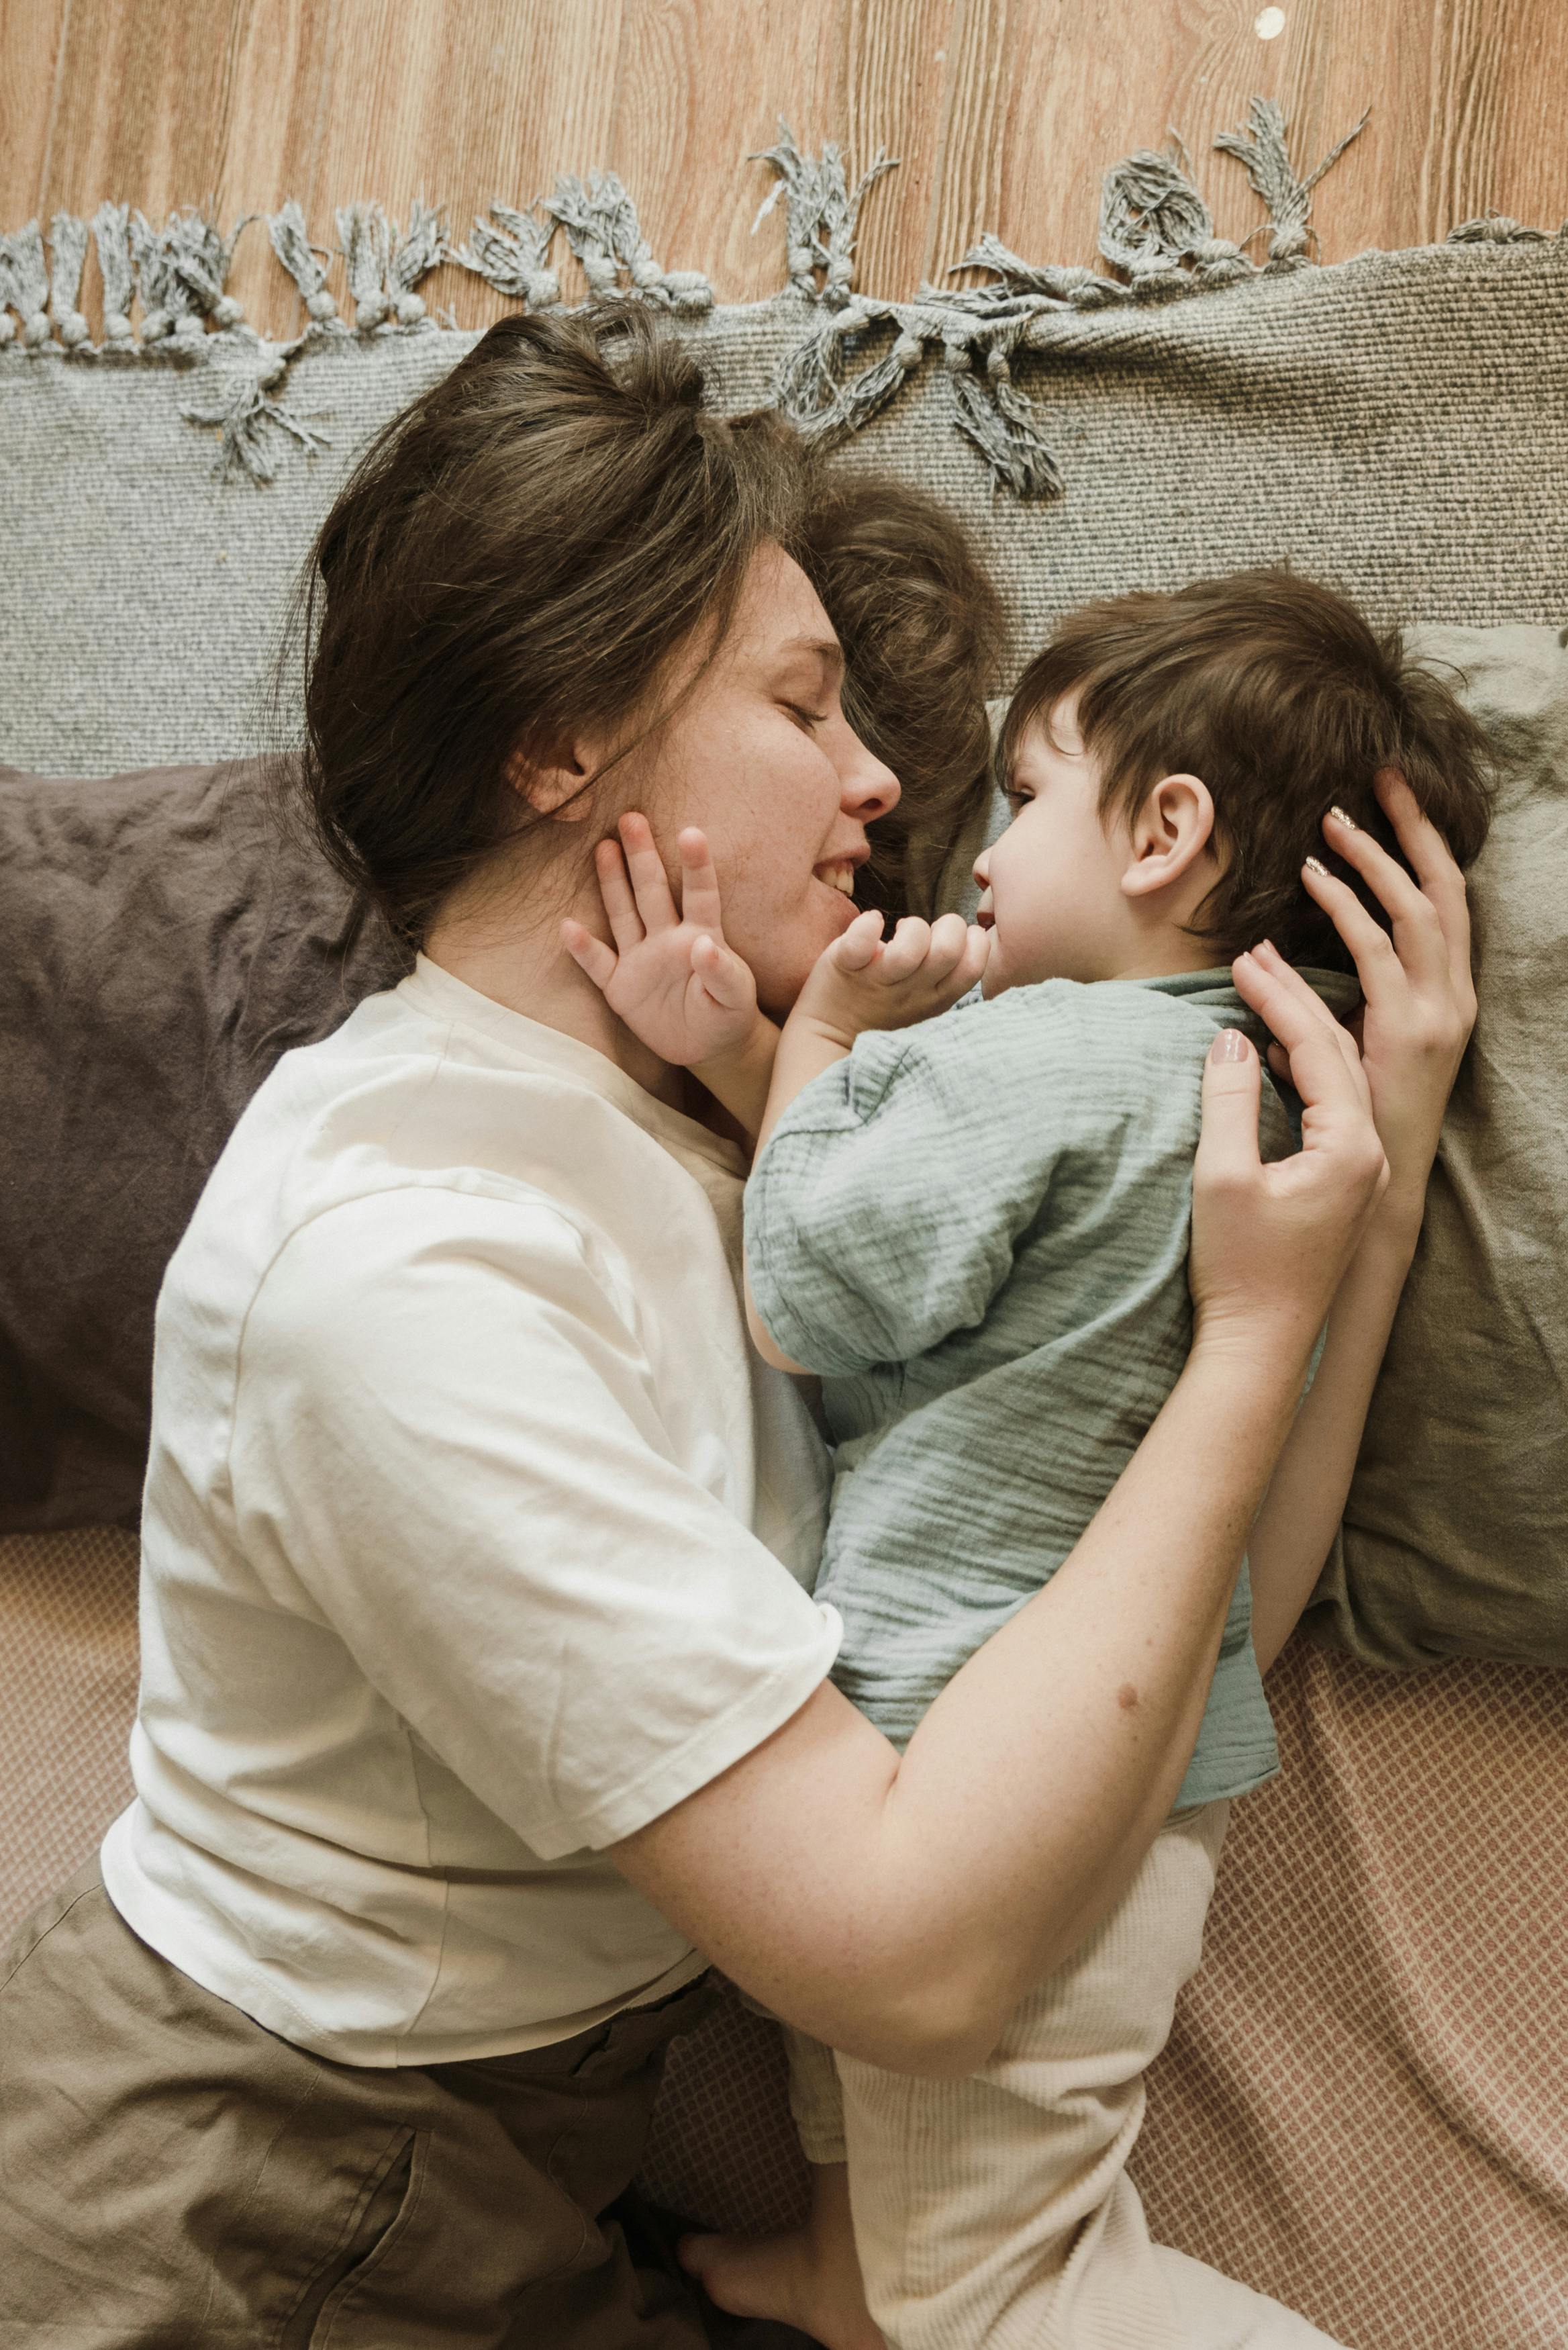 Woman holds her little son | Source: Pexels